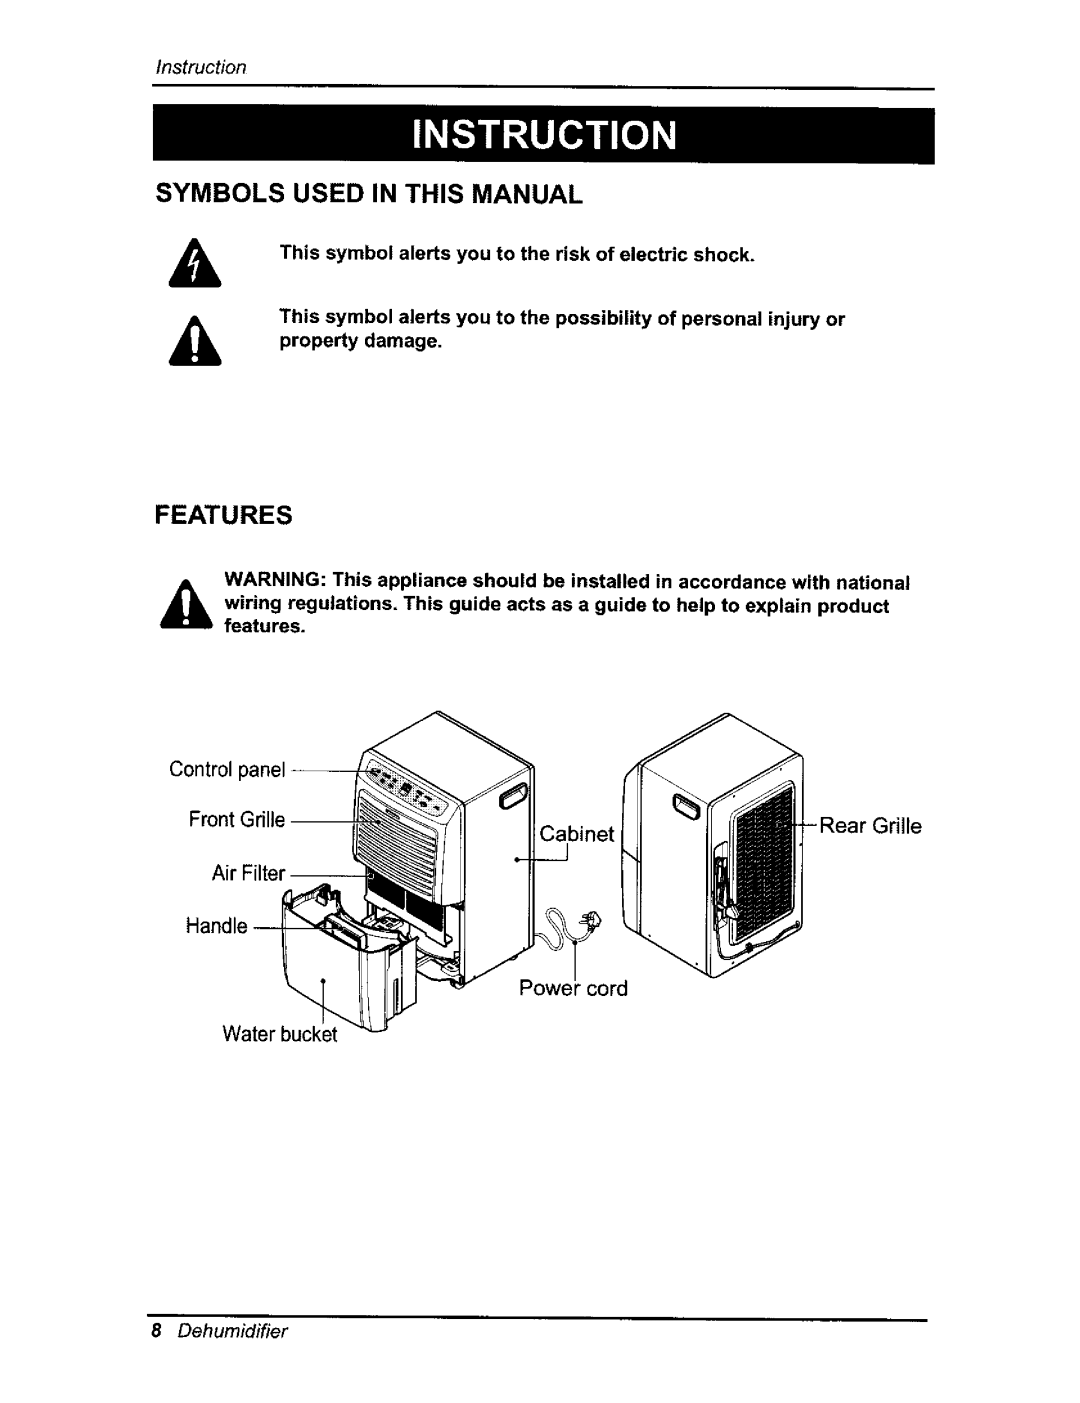 Kenmore 580.54701 Symbols Used In This Manual, Features, Control Front Grille, Cabinet, Rear Grille, Instruction 